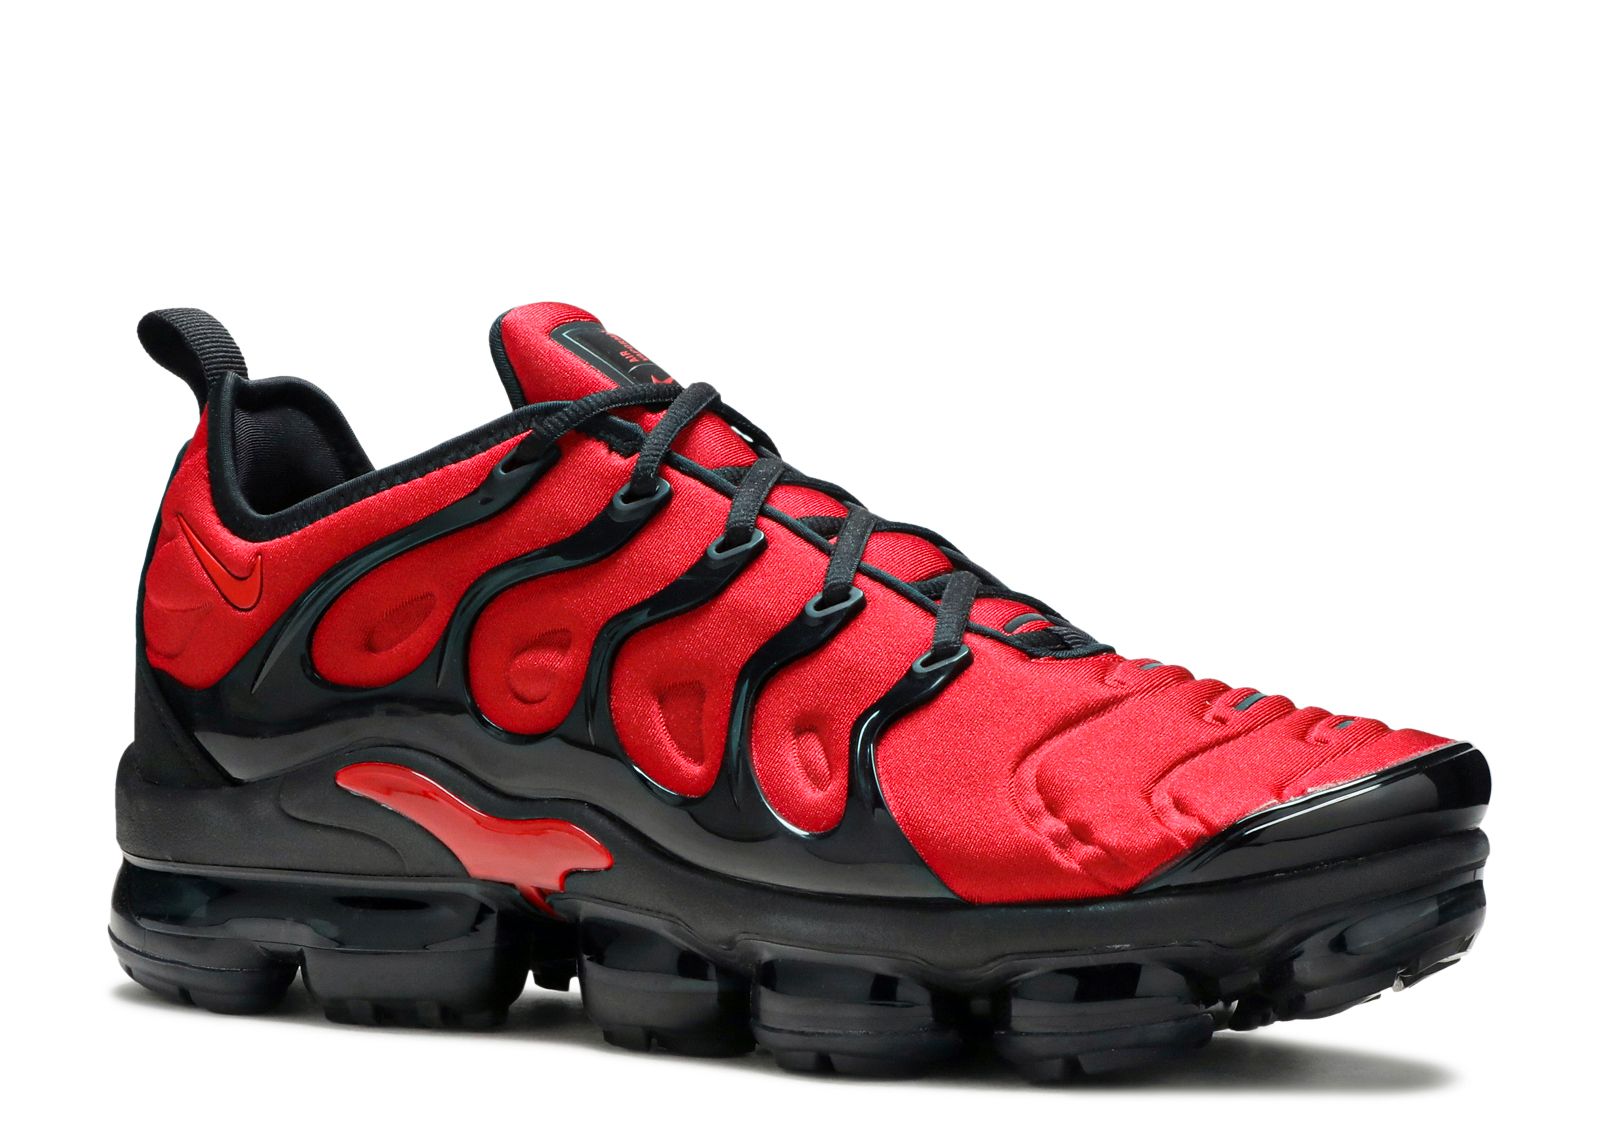 red vapormax plus outfit